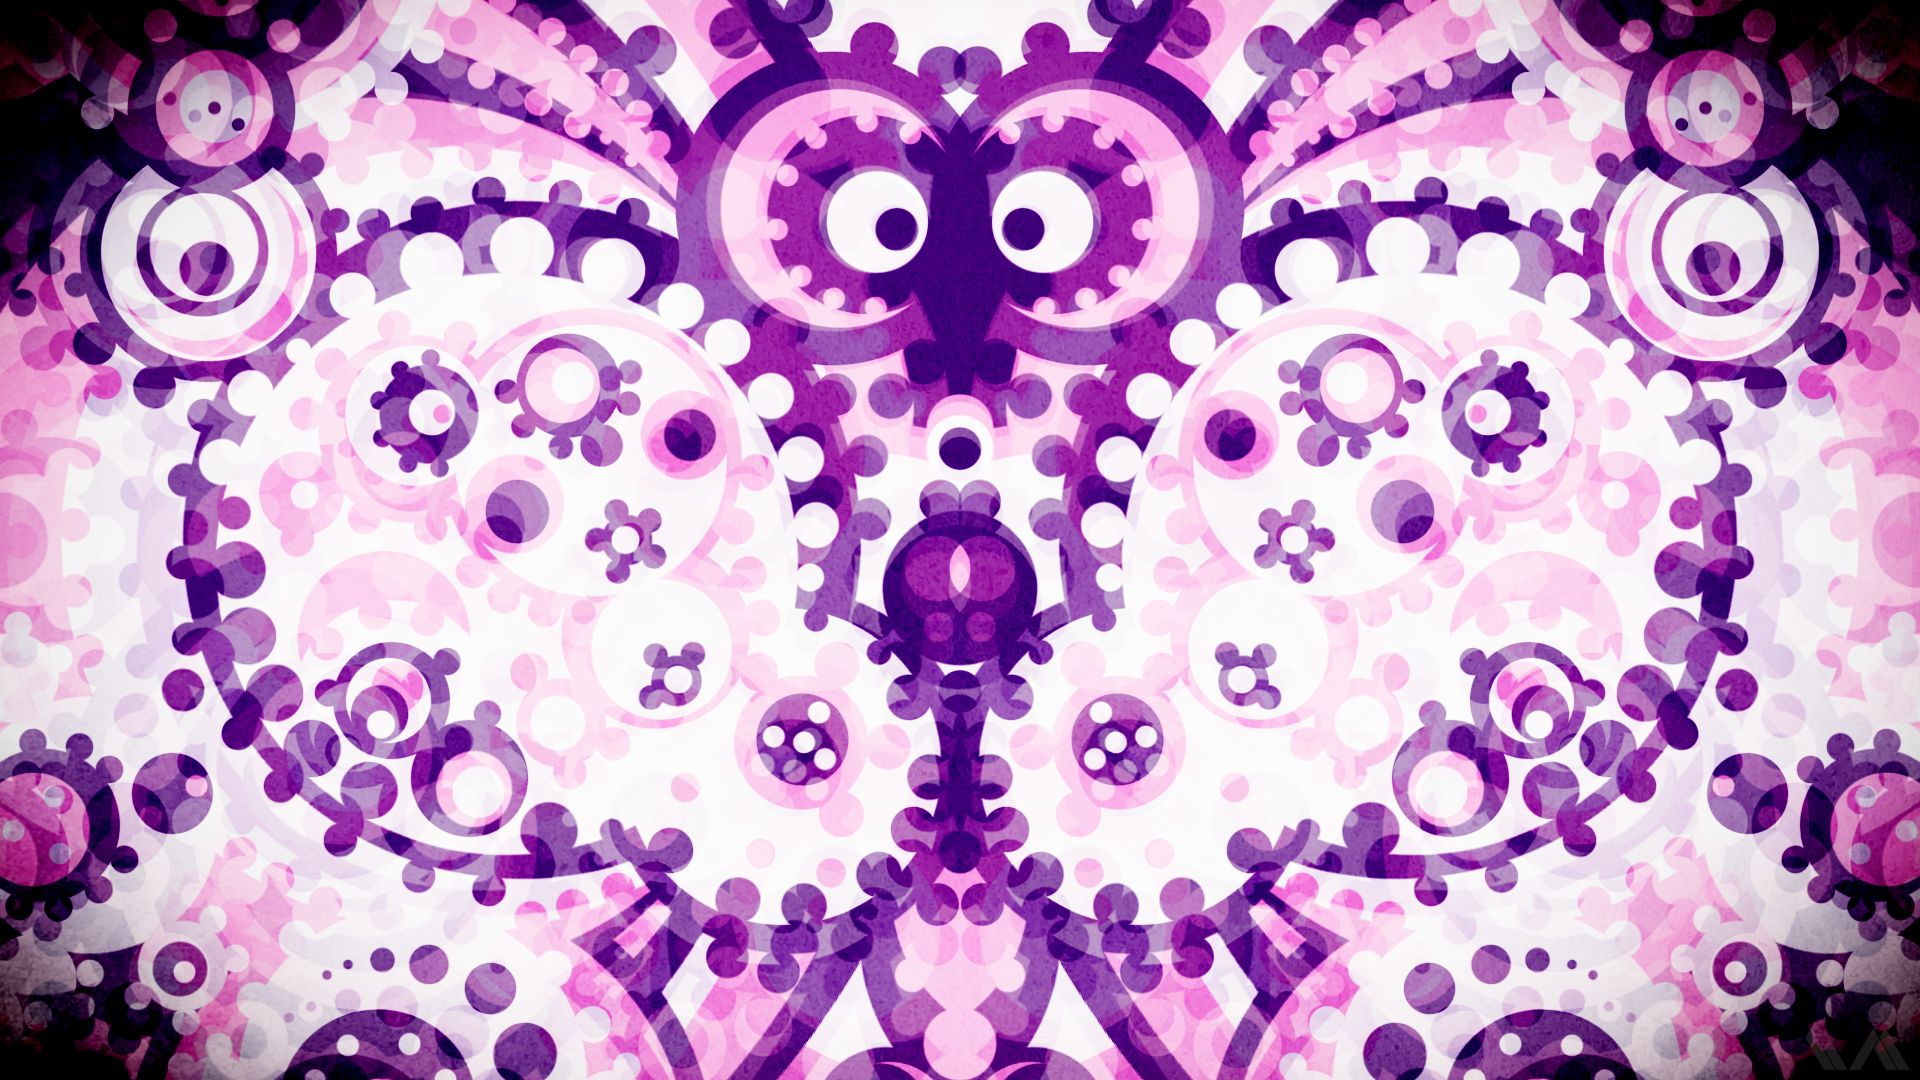 purple, 3d, abstract, gears, illusion 2160p